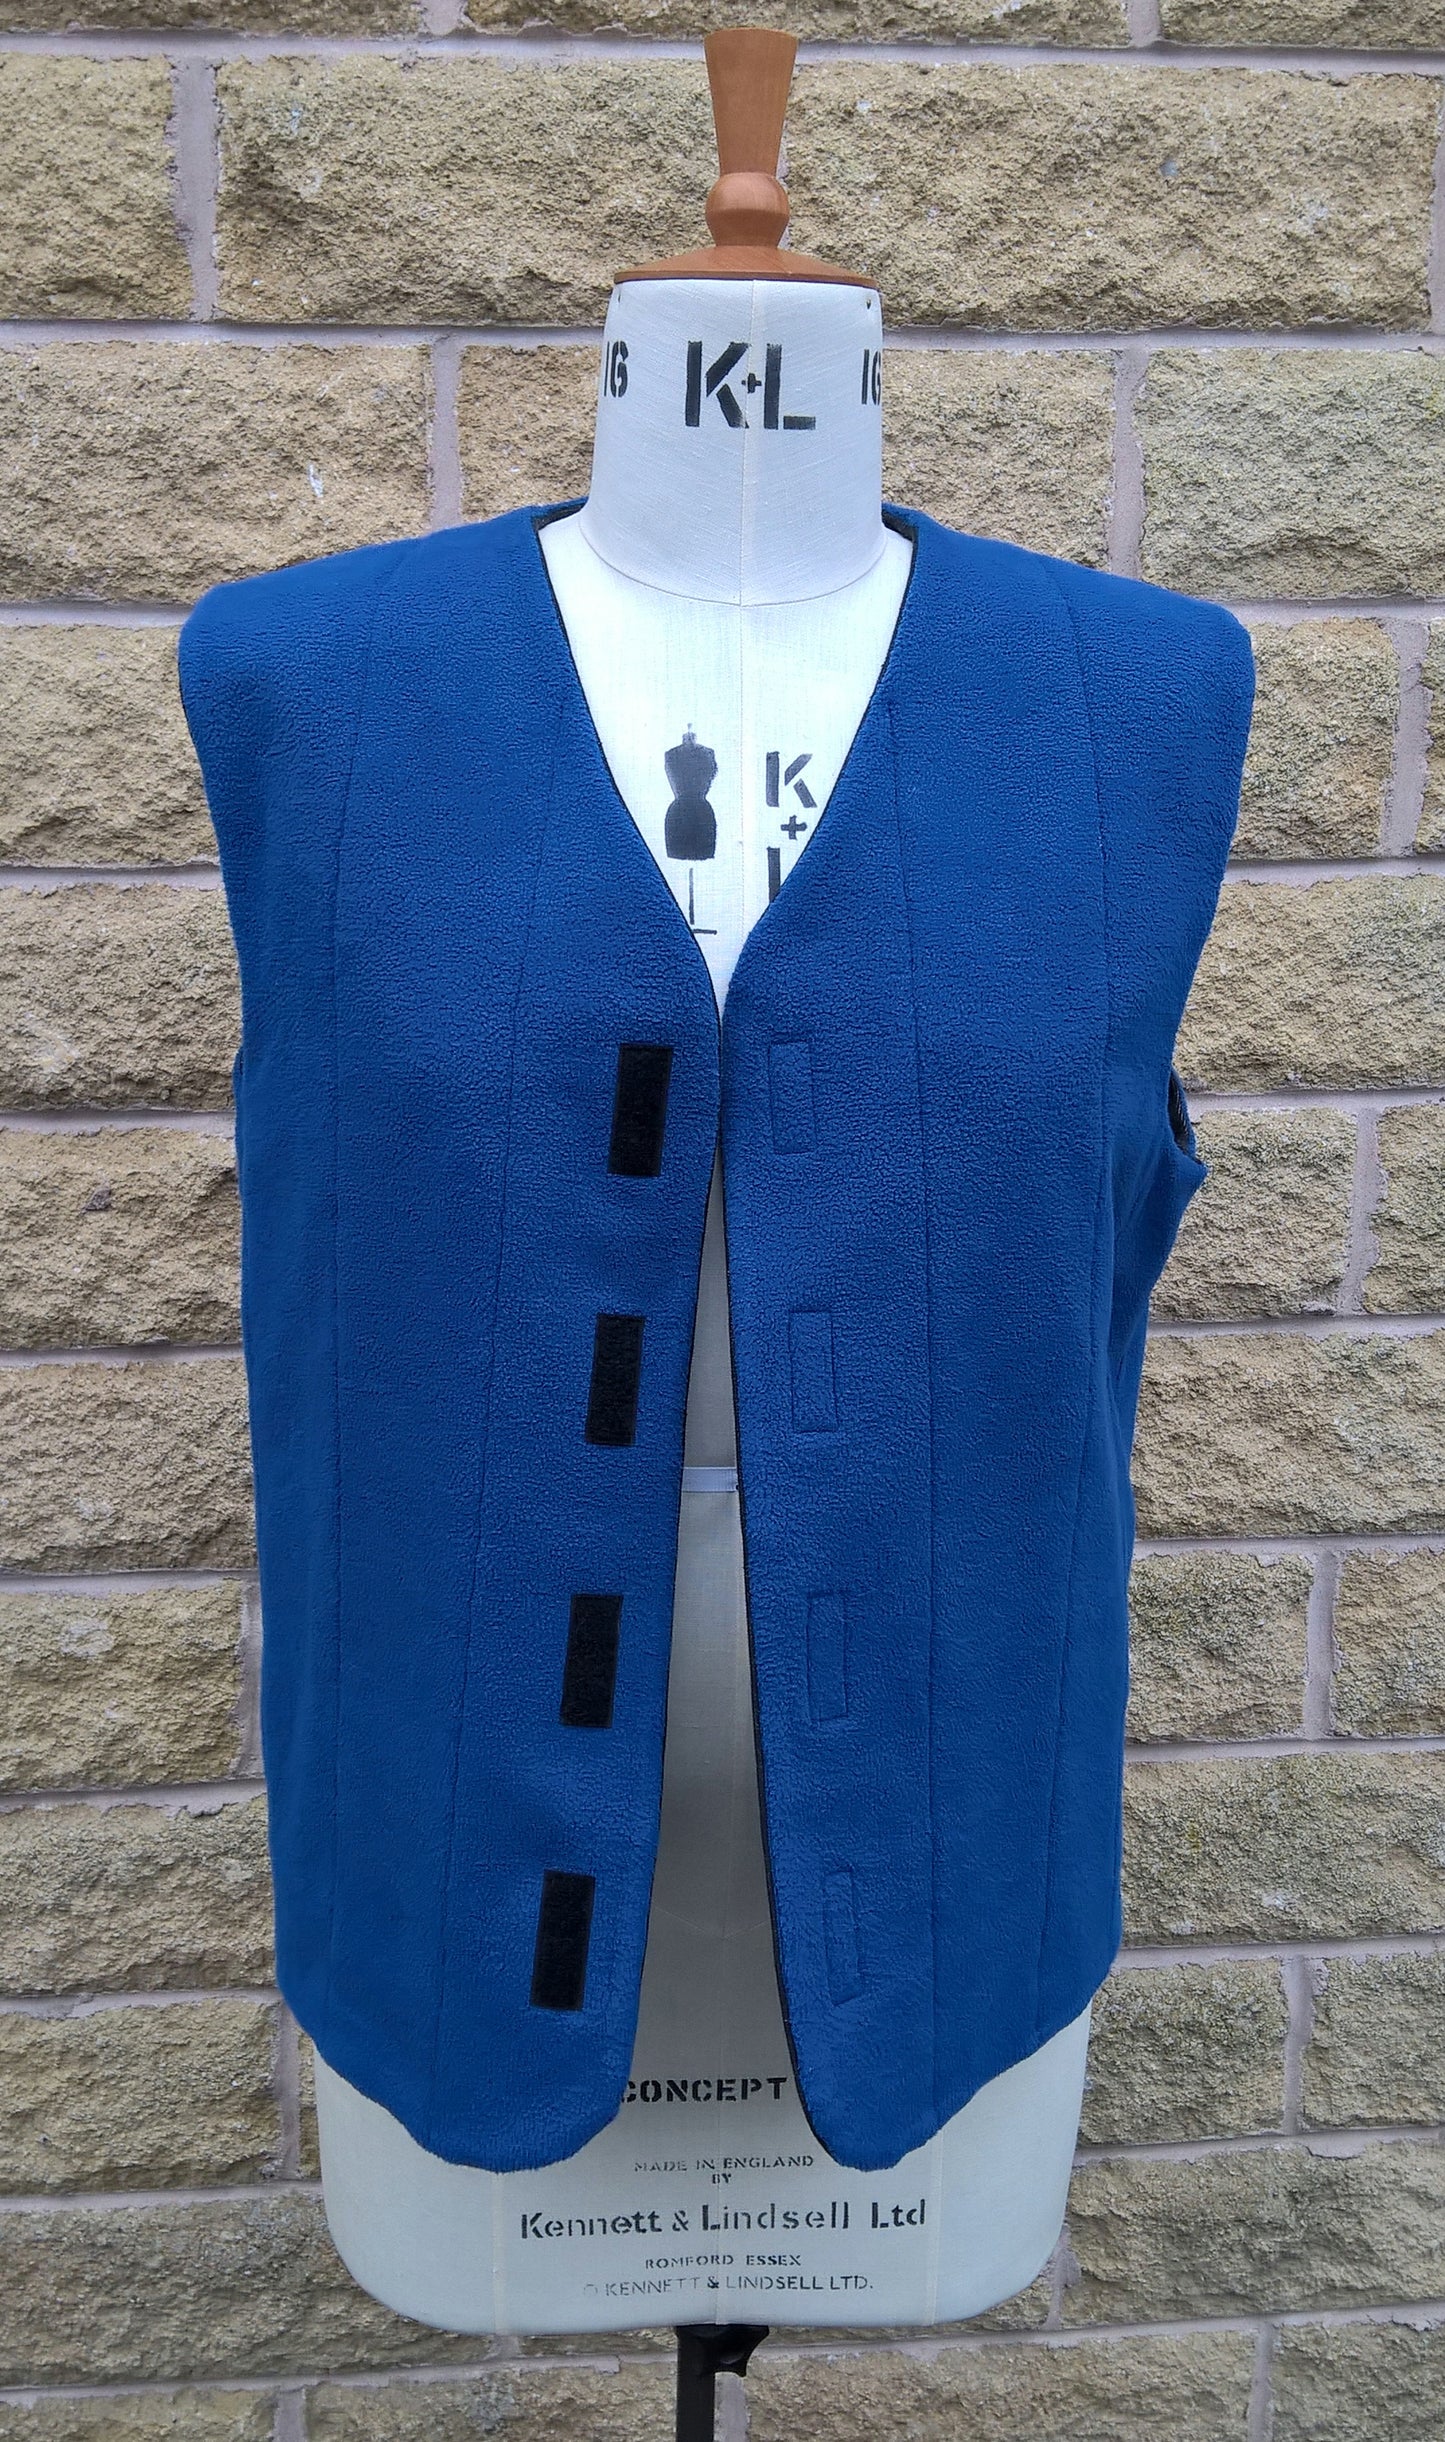 Quilted Gilet in Black denim with blue fleece lining